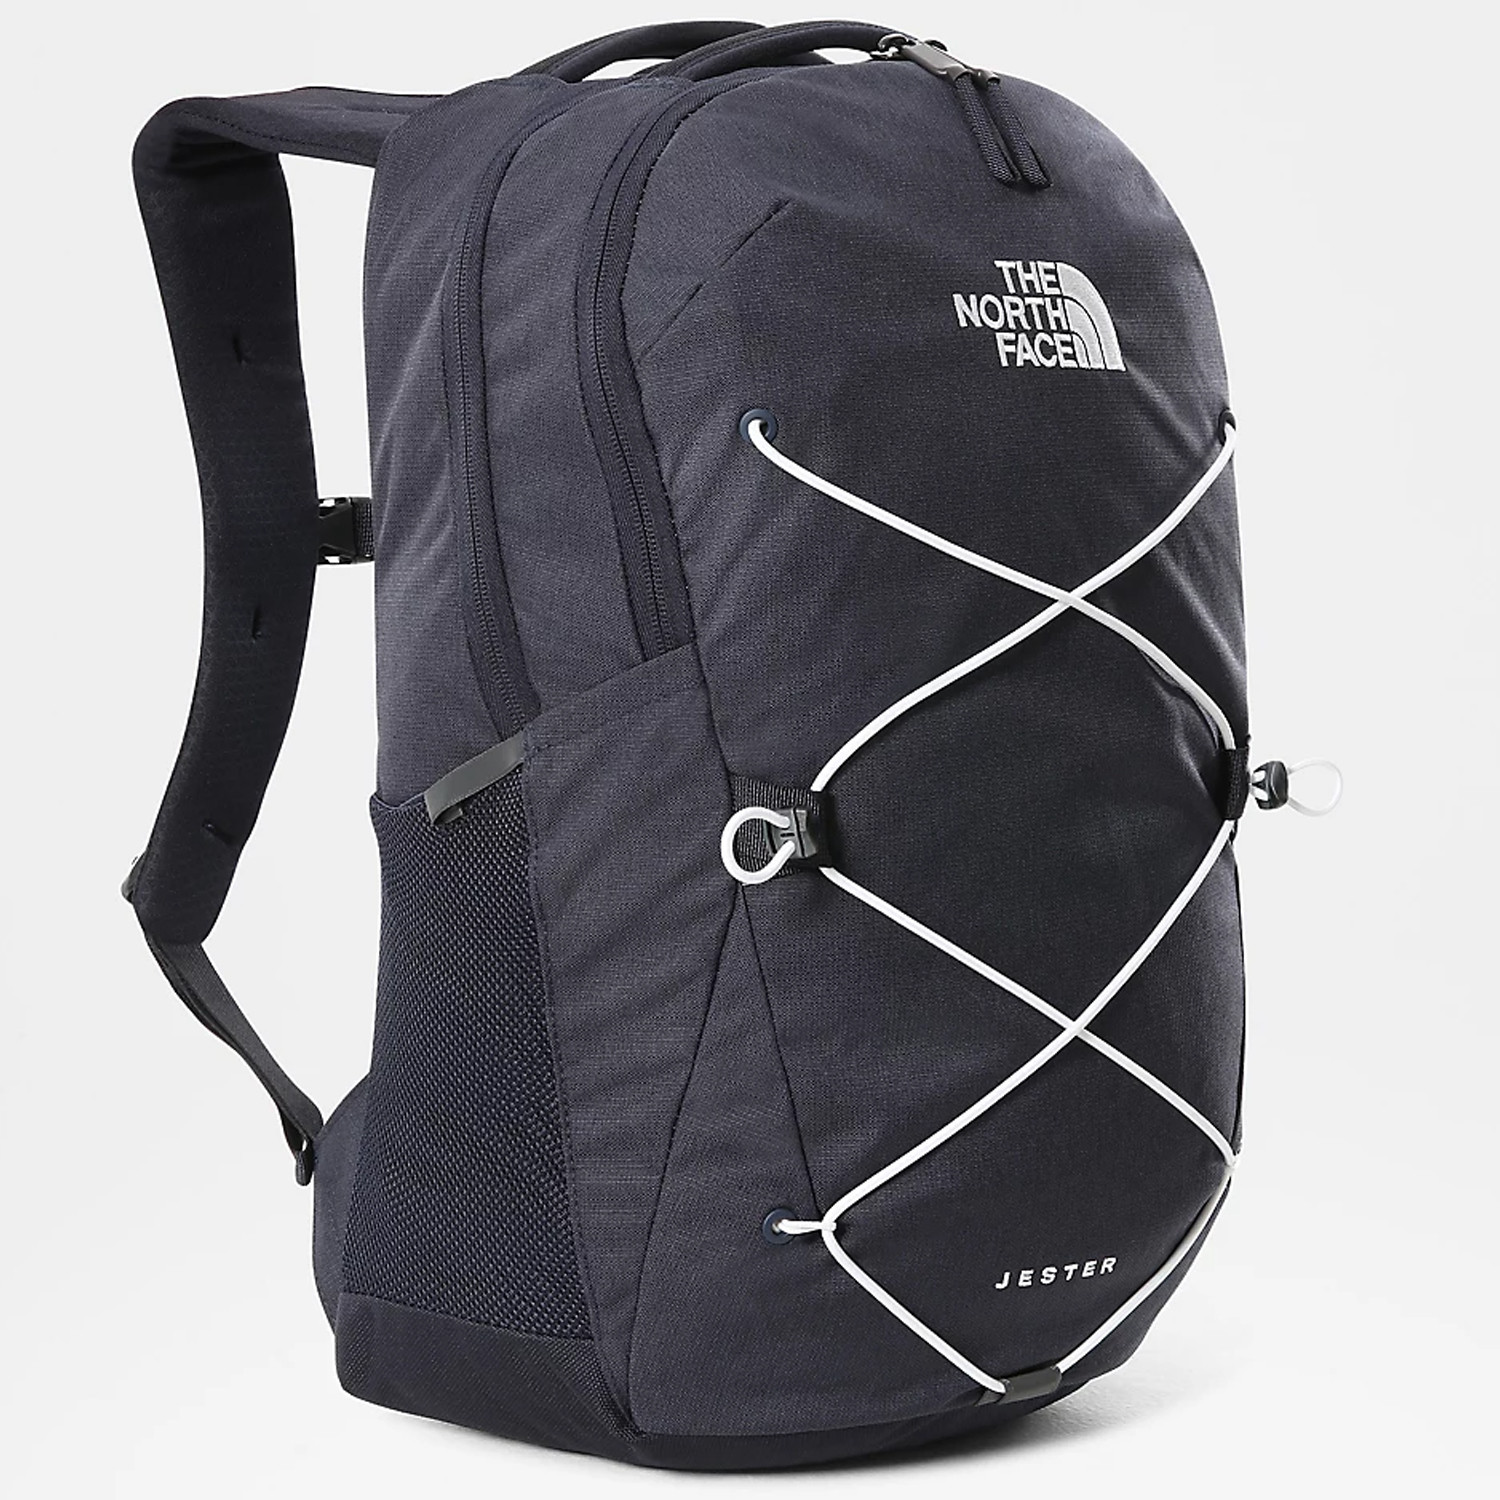 THE NORTH FACE Jester Σακίδιο Πλάτης 28L (9000073471_51559)